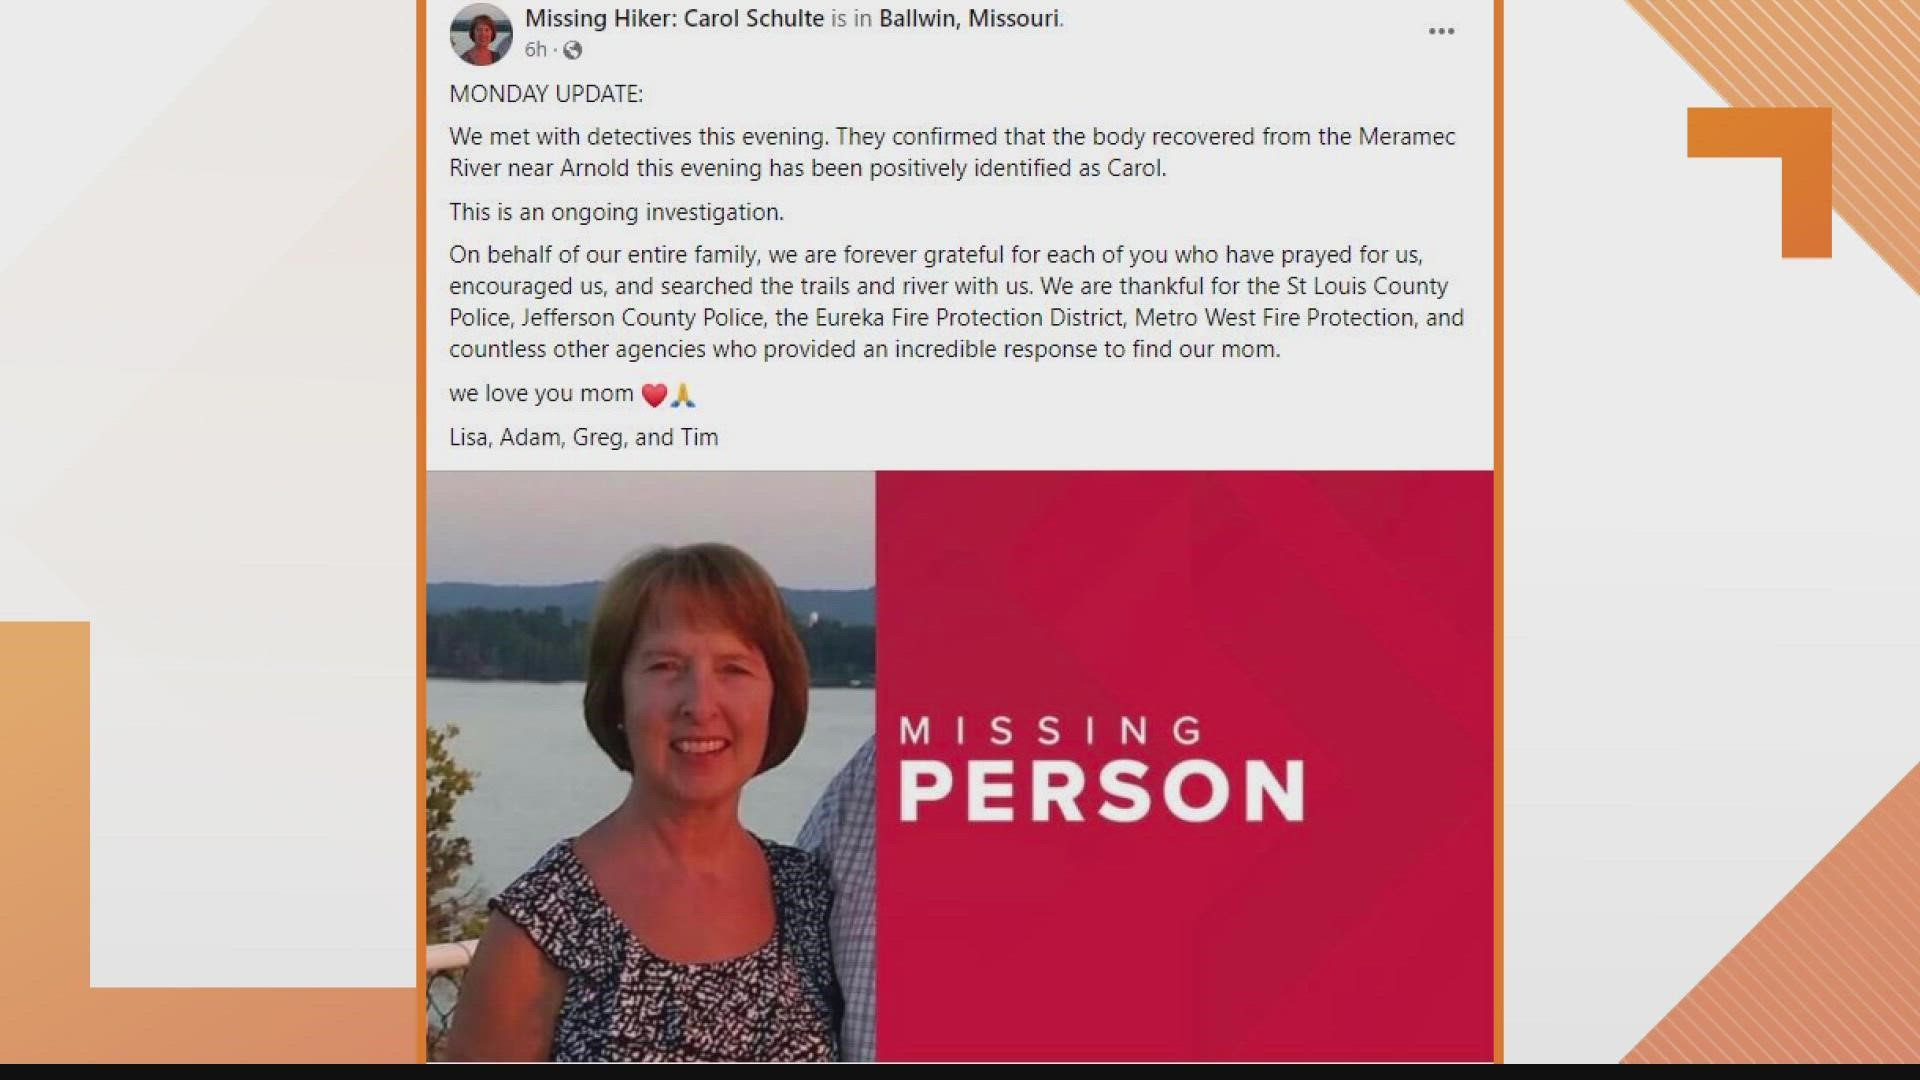 Carol Schulte, 72, was last known to be heading out for a hike on May 23 and hadn’t been heard from since. Her body was recovered from the river Monday night.